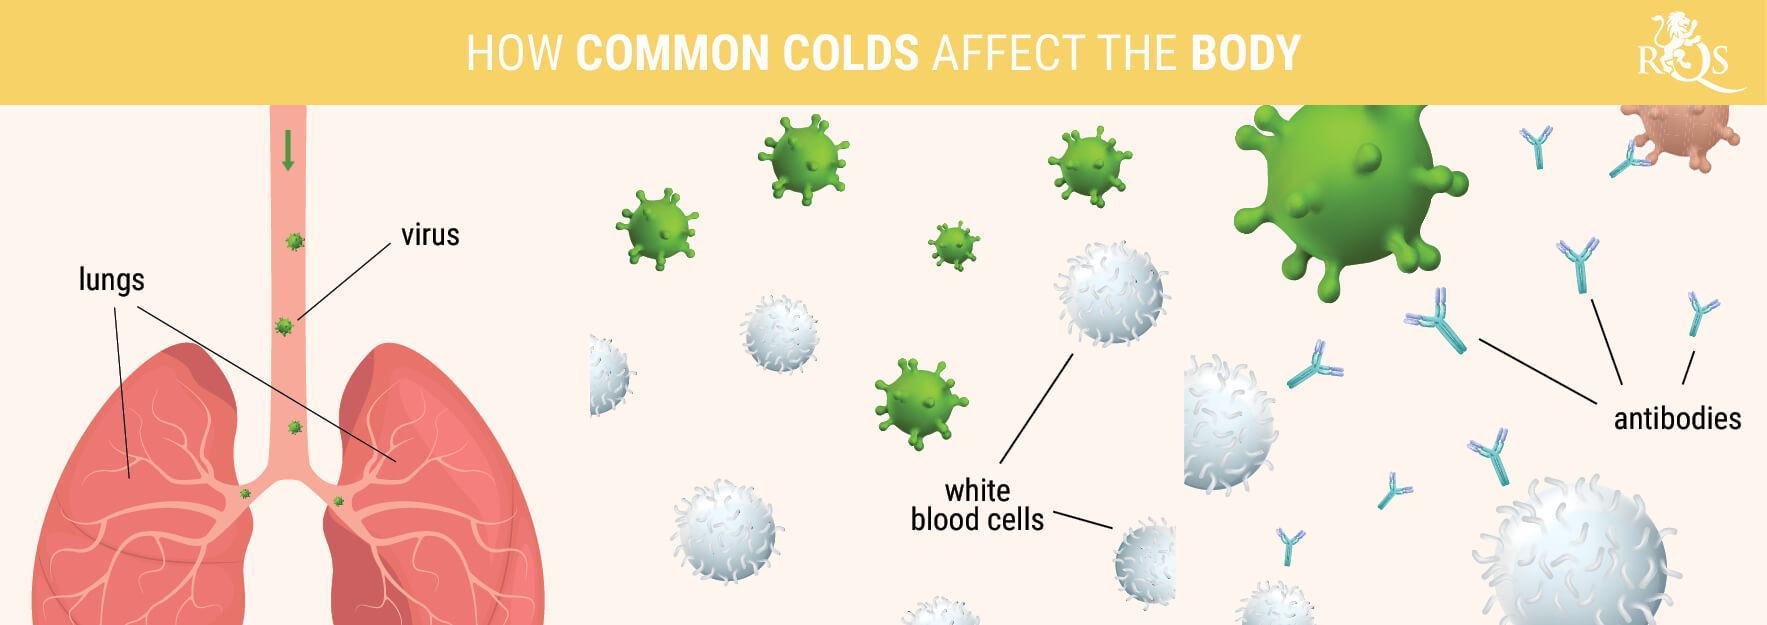 HOW COMMON COLDS AFFECT THE BODY